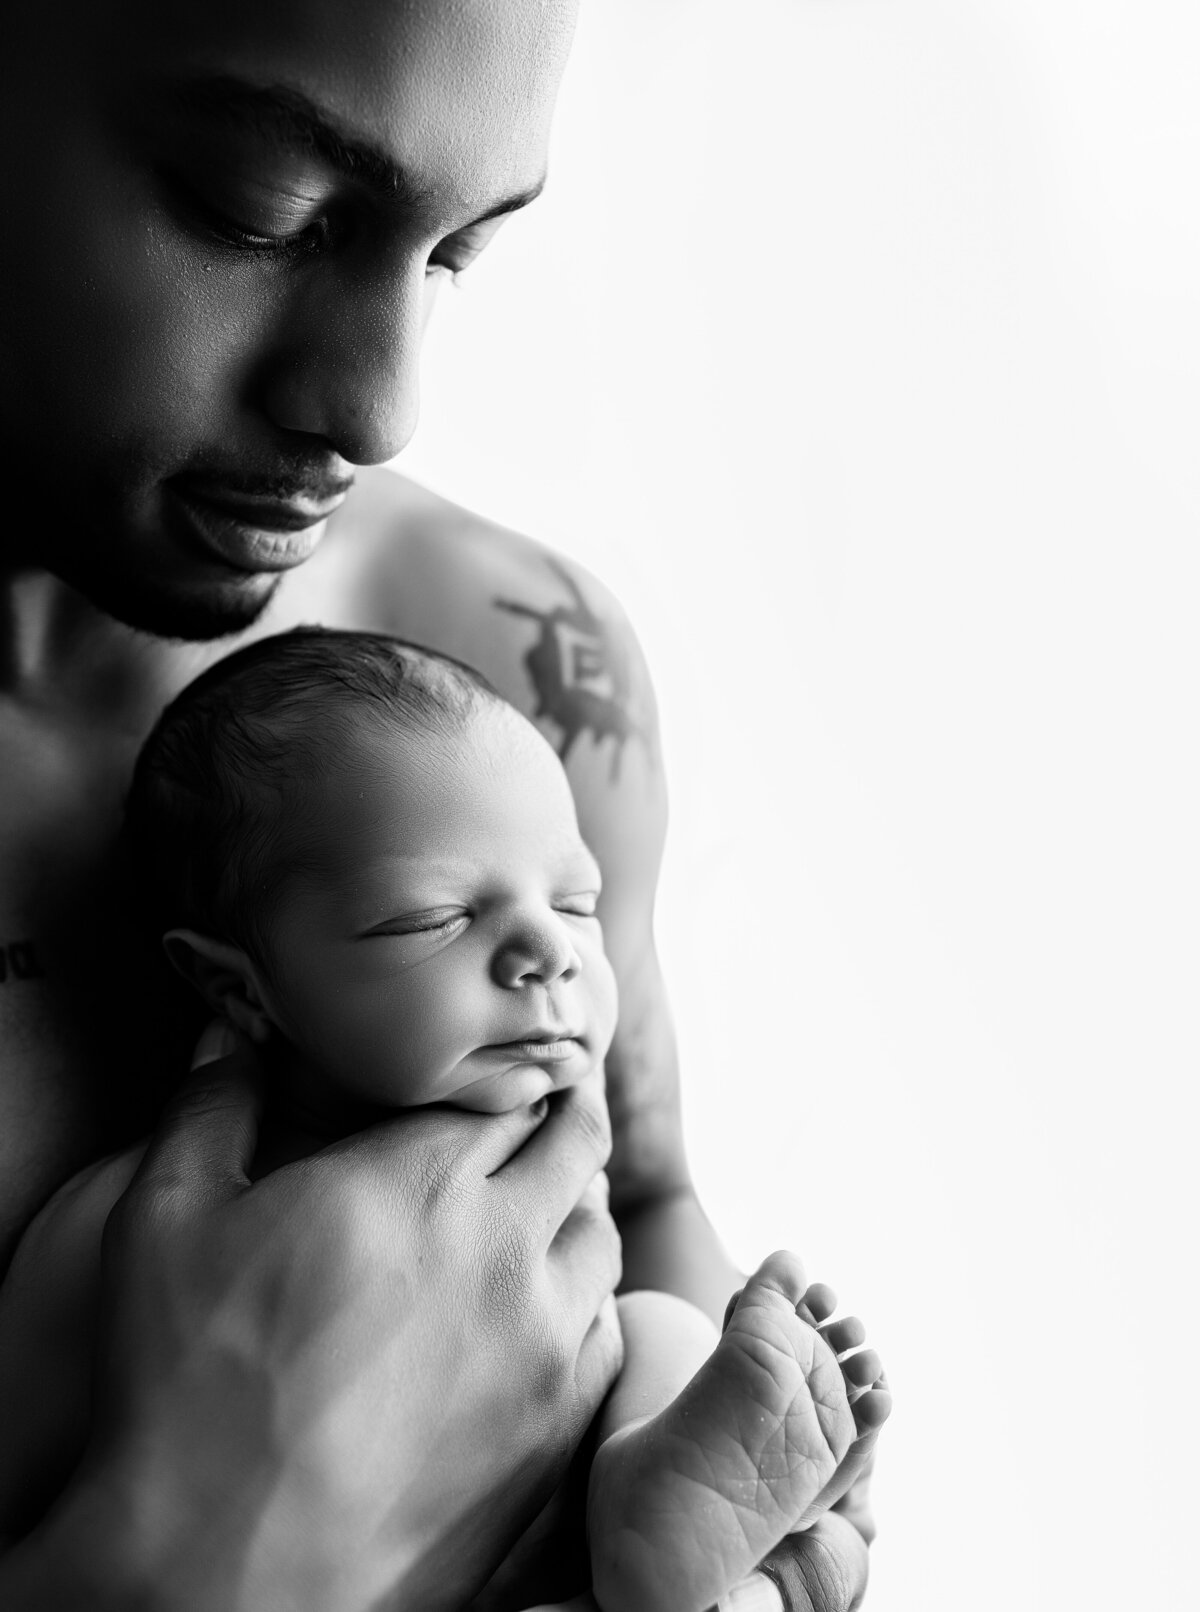 Black and white portrait of new father holding newborn son skin to skin contact while looking down at him